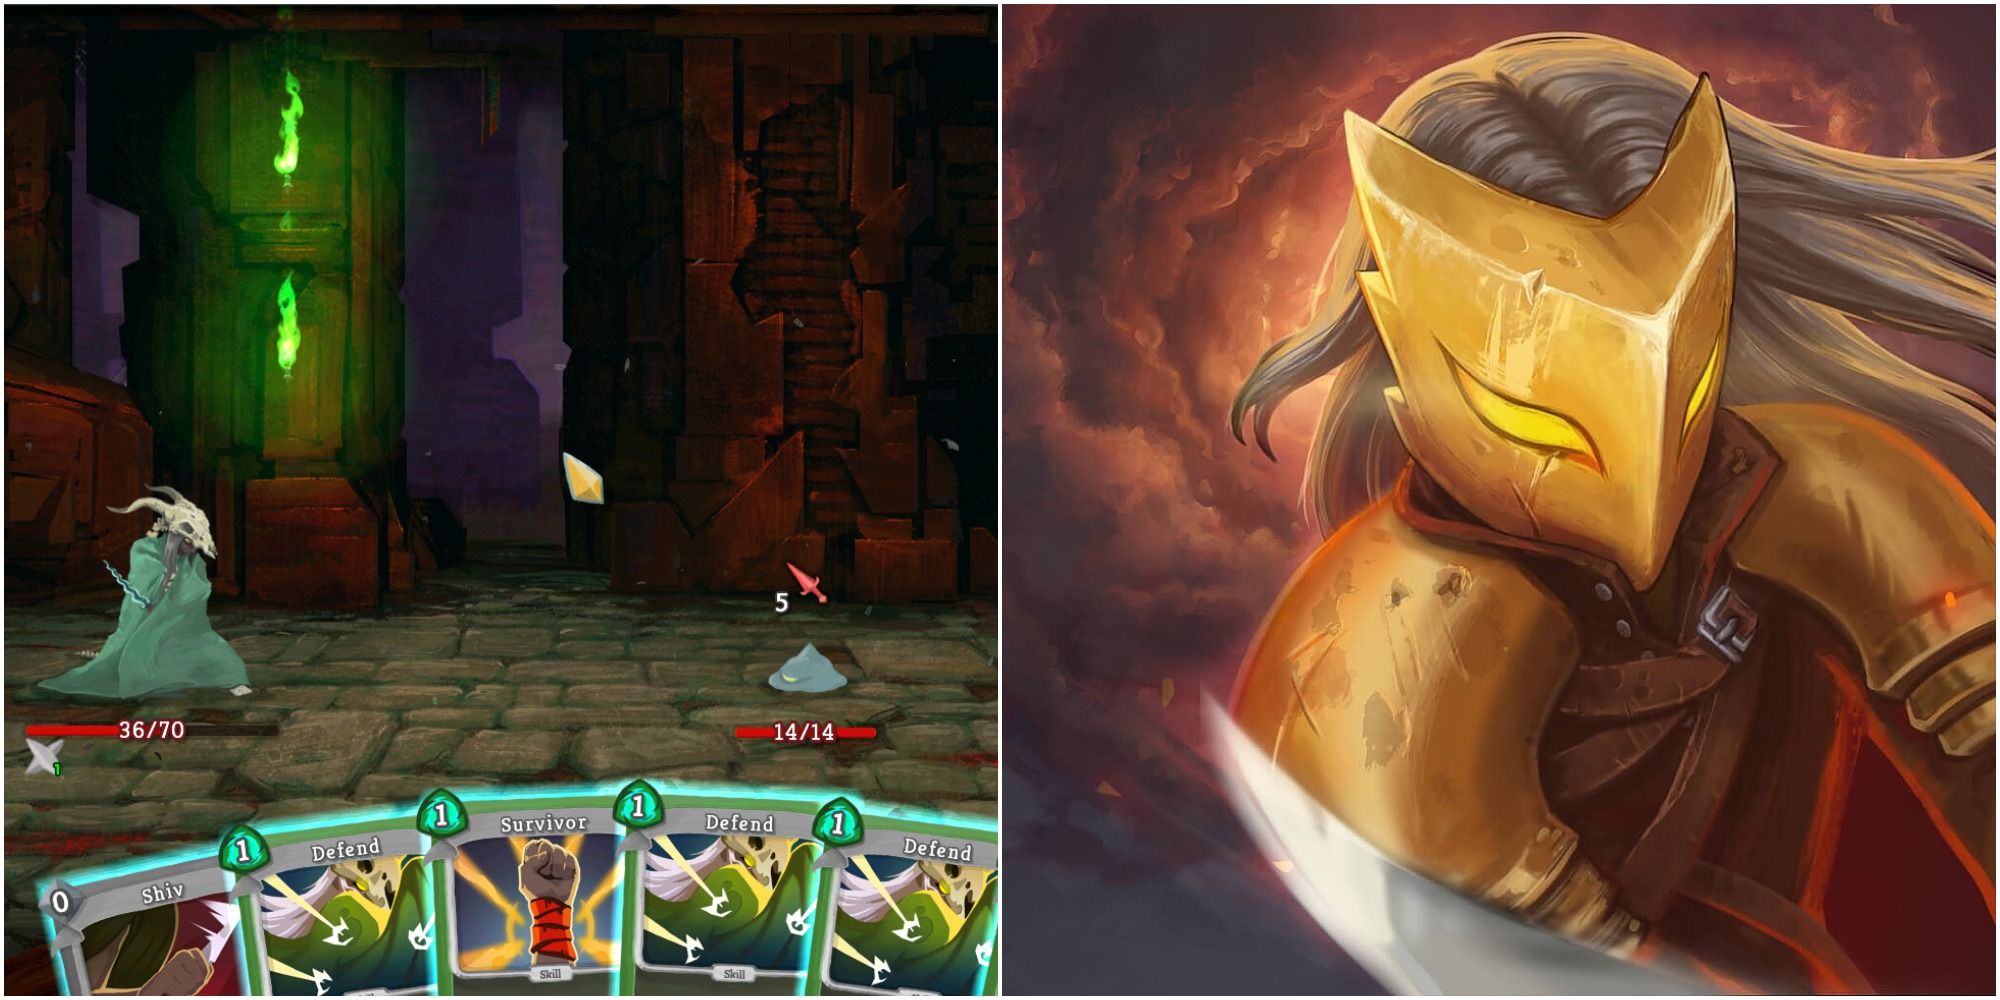 A collage showing gameplay and art from Slay the Spire